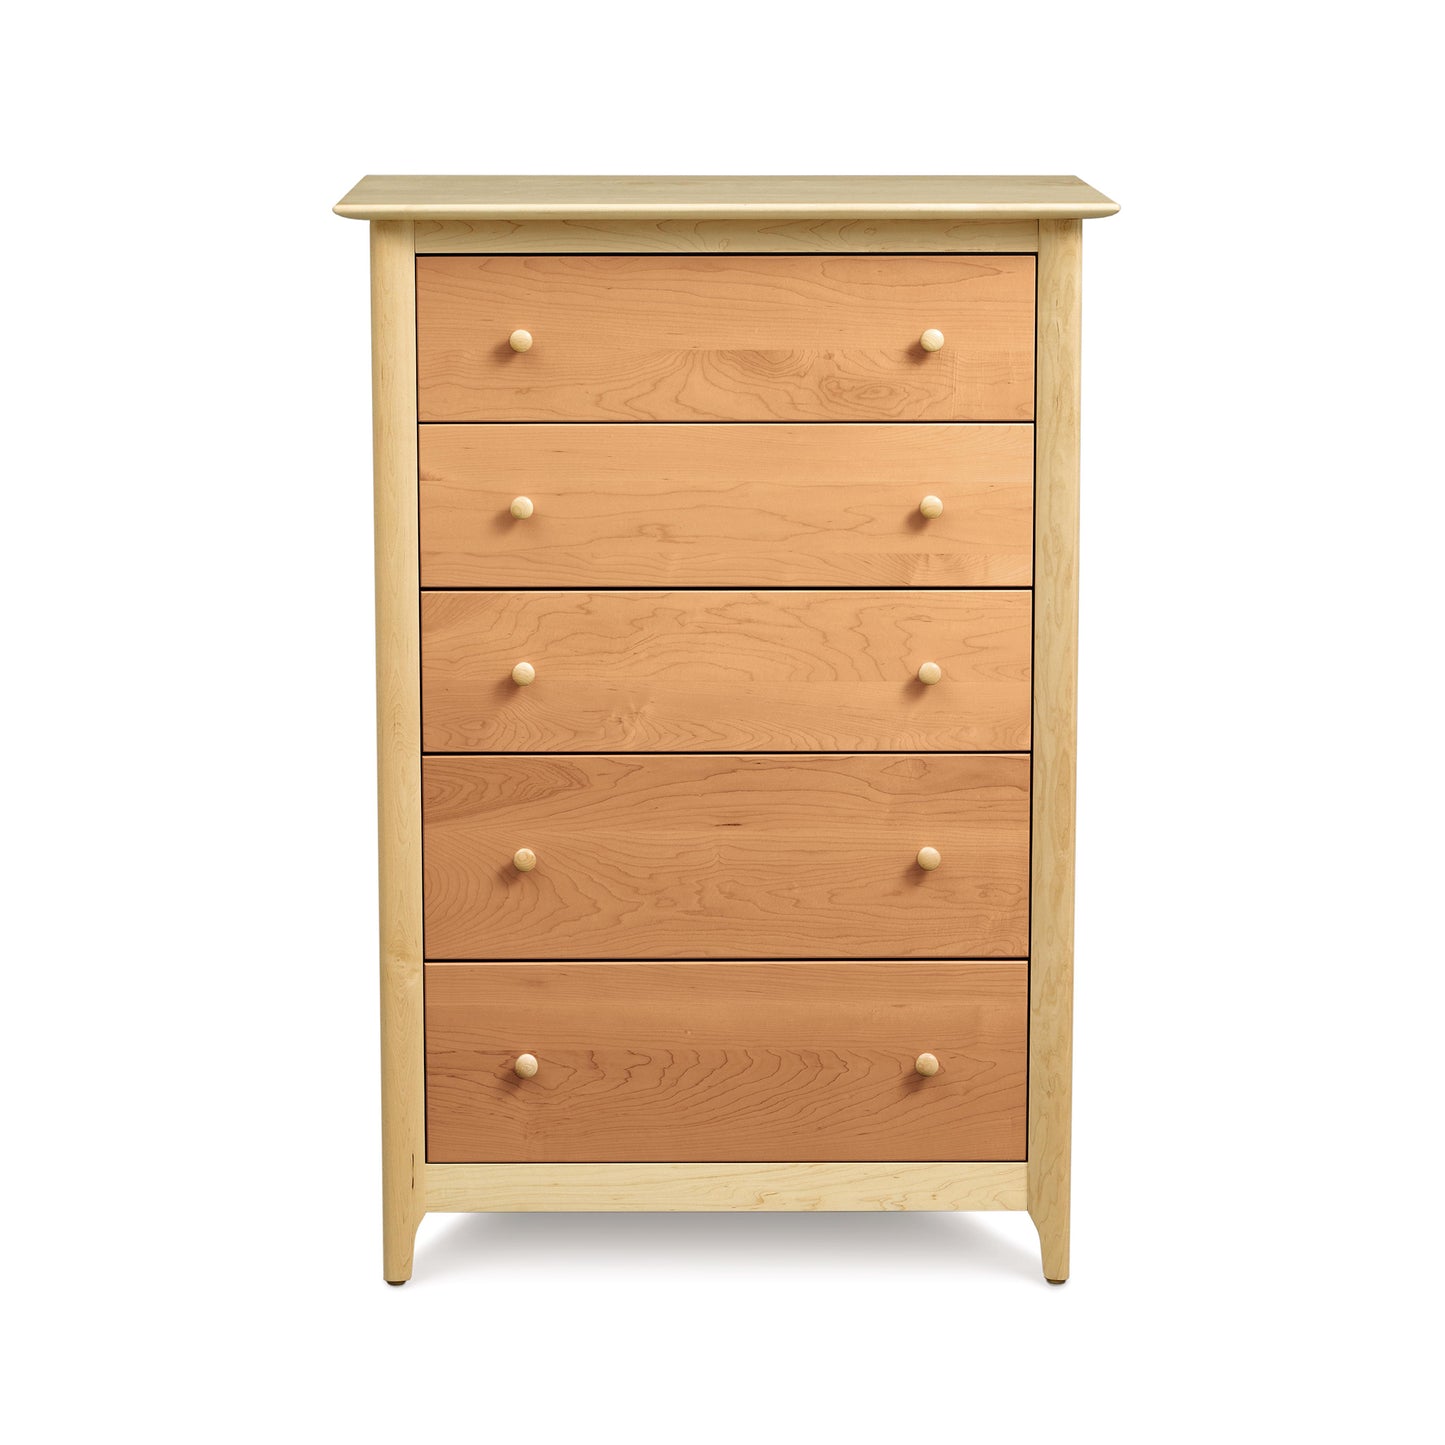 A handmade Sarah 5-Drawer Chest from Copeland Furniture, with a Shaker design, featuring beautiful cherry wood, showcased on a clean white background.